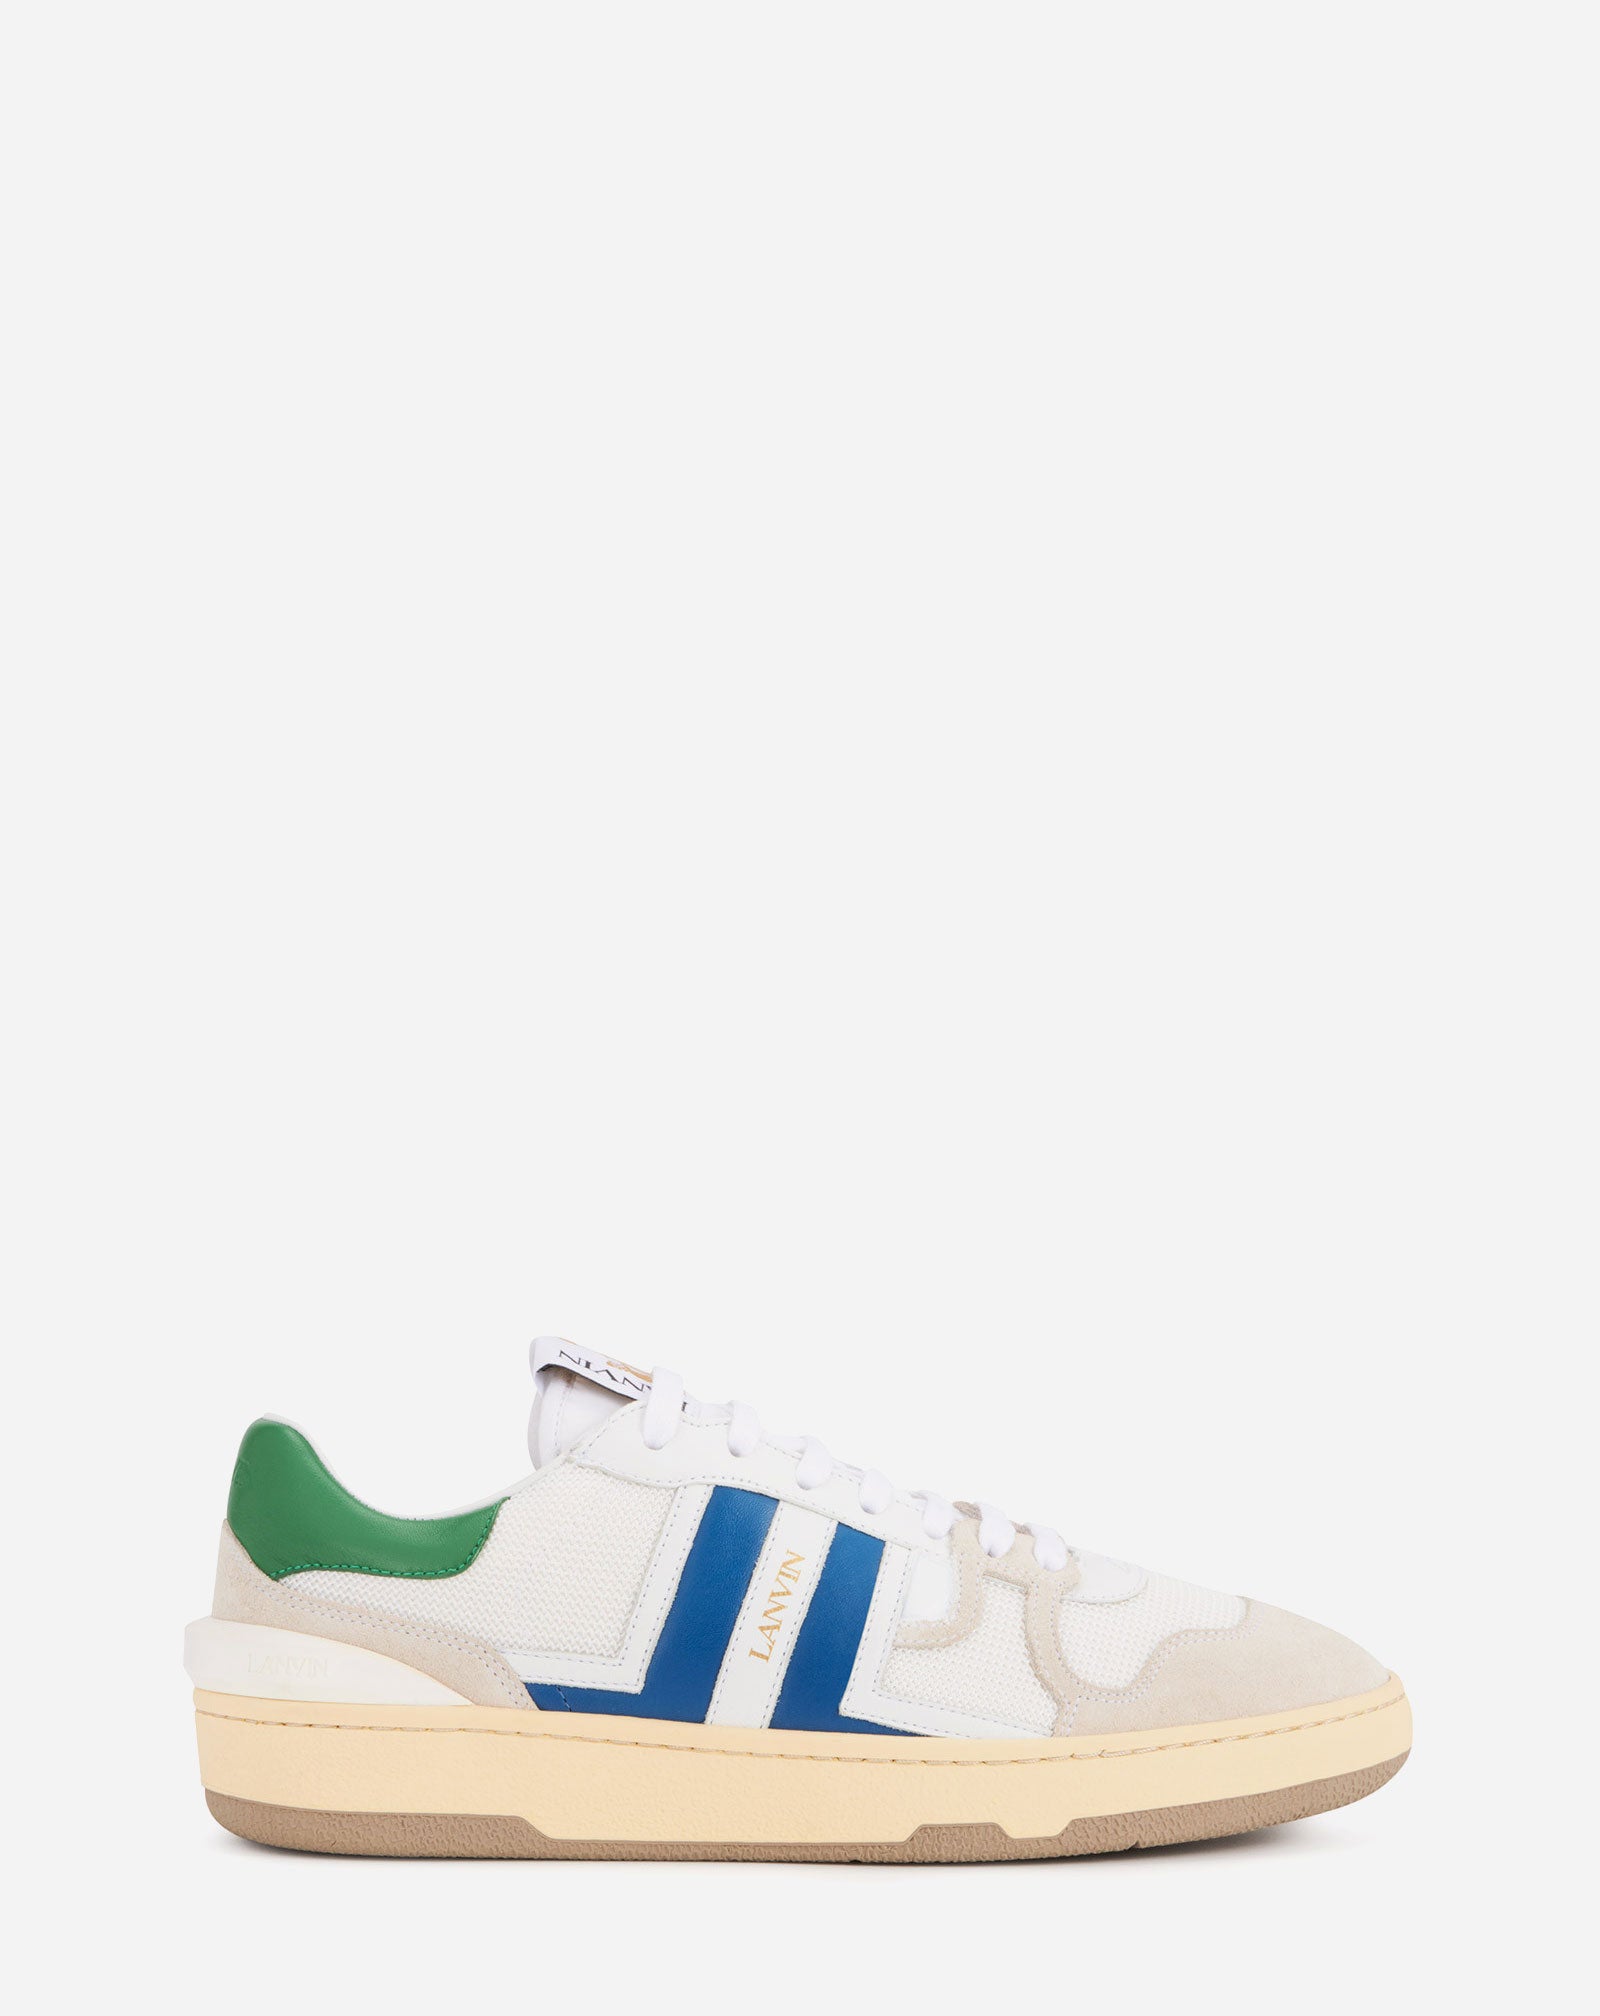 LEATHER CLAY LOW-TOP SNEAKERS, WHITE/BLUE